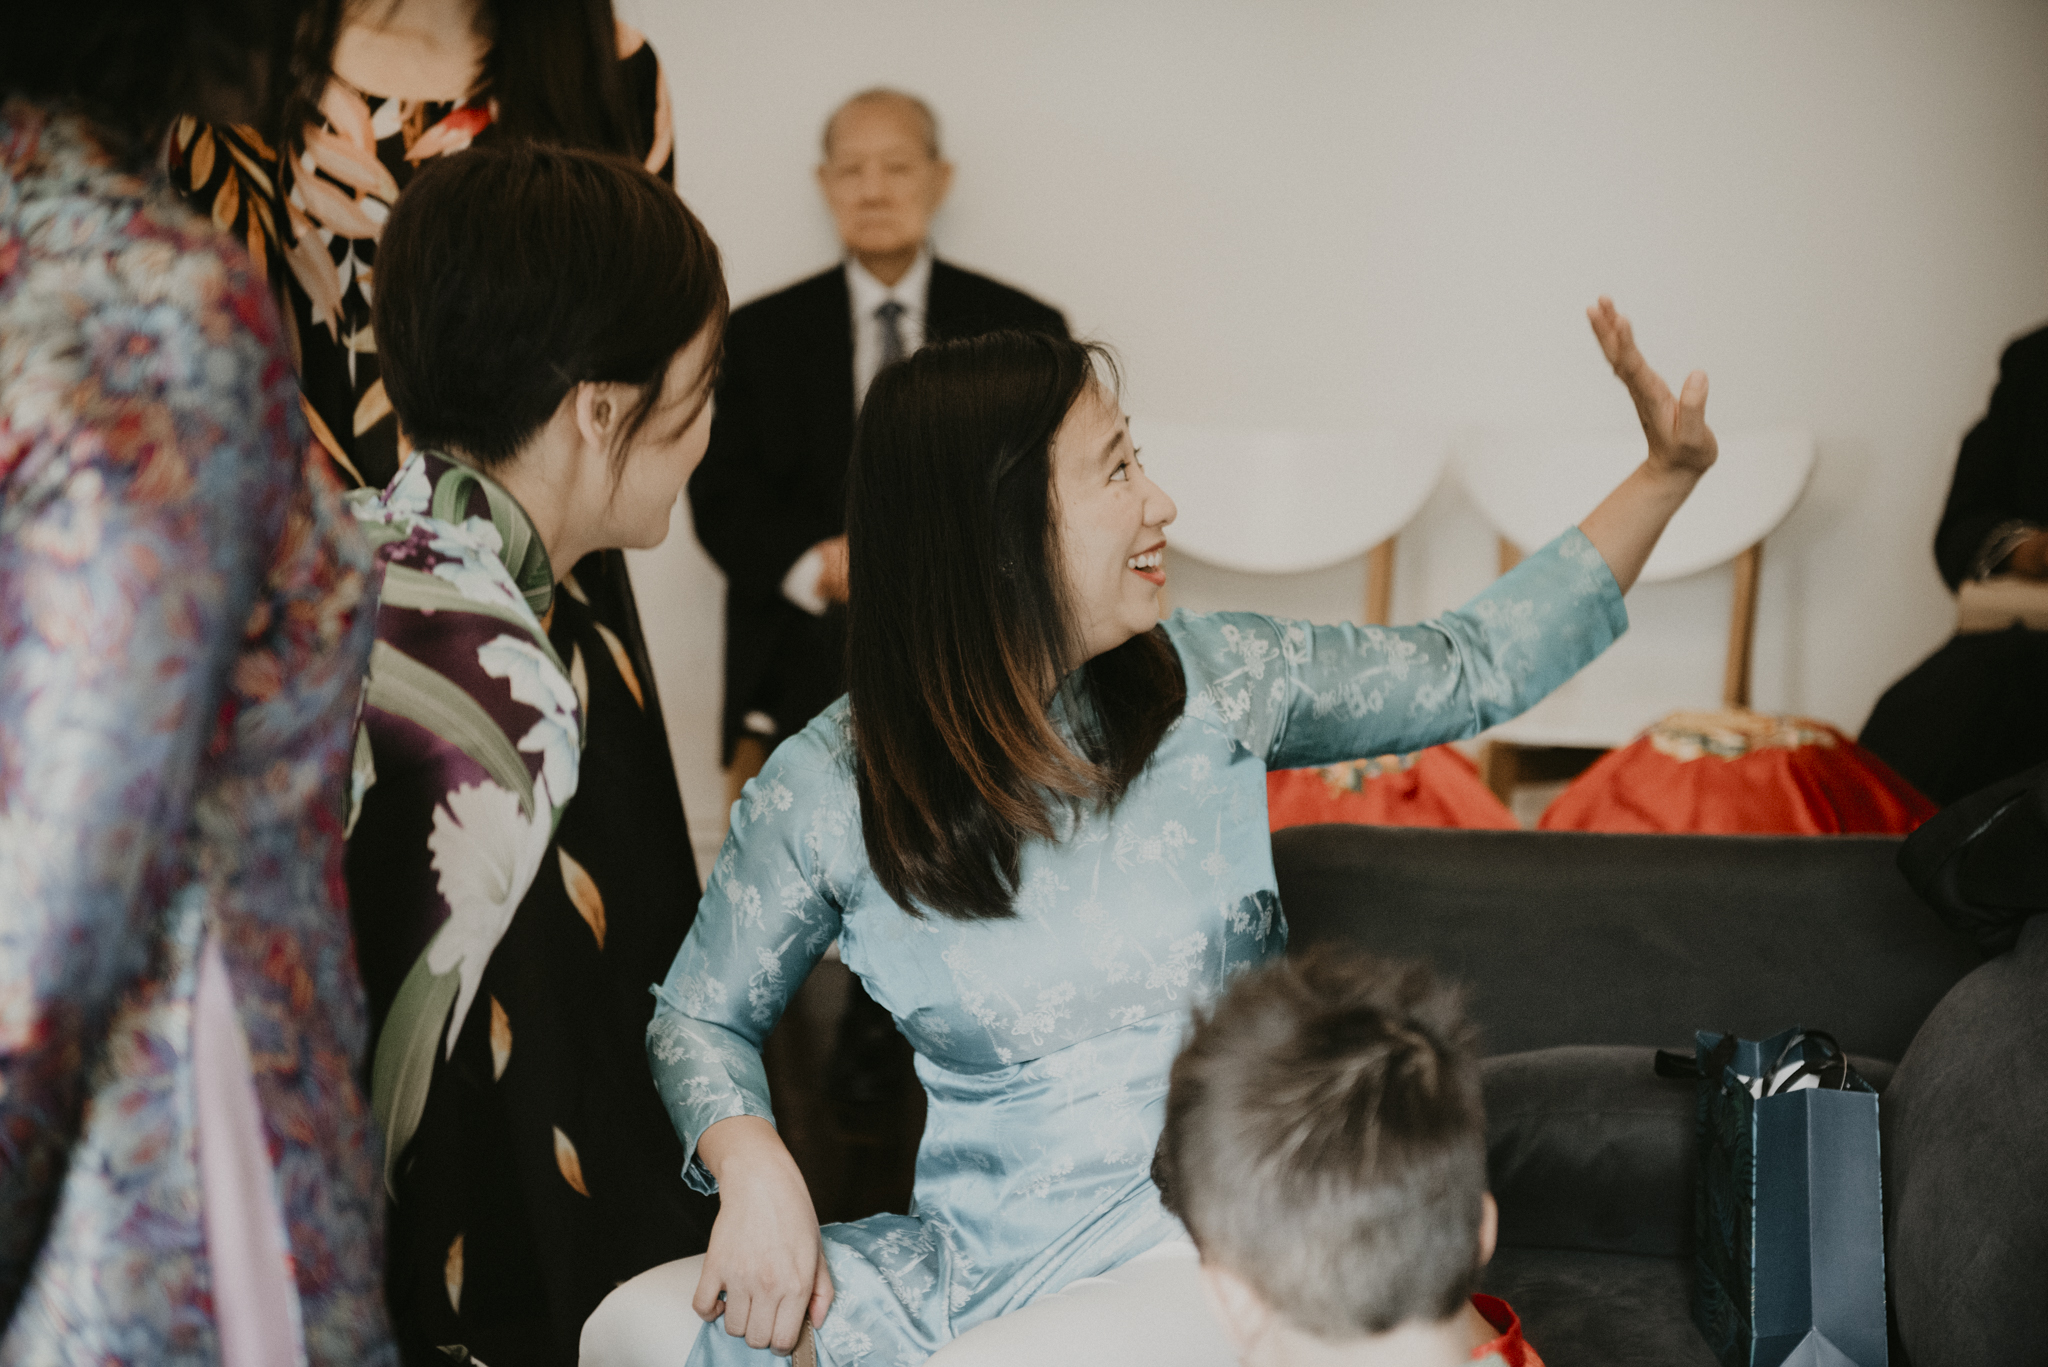 agnes-duy-15th-december-2018-chinese-vietnamese-wedding-tea-ceremony-yarraville-home-house-documentary-candid-photographer-sarah-matler-photography-56